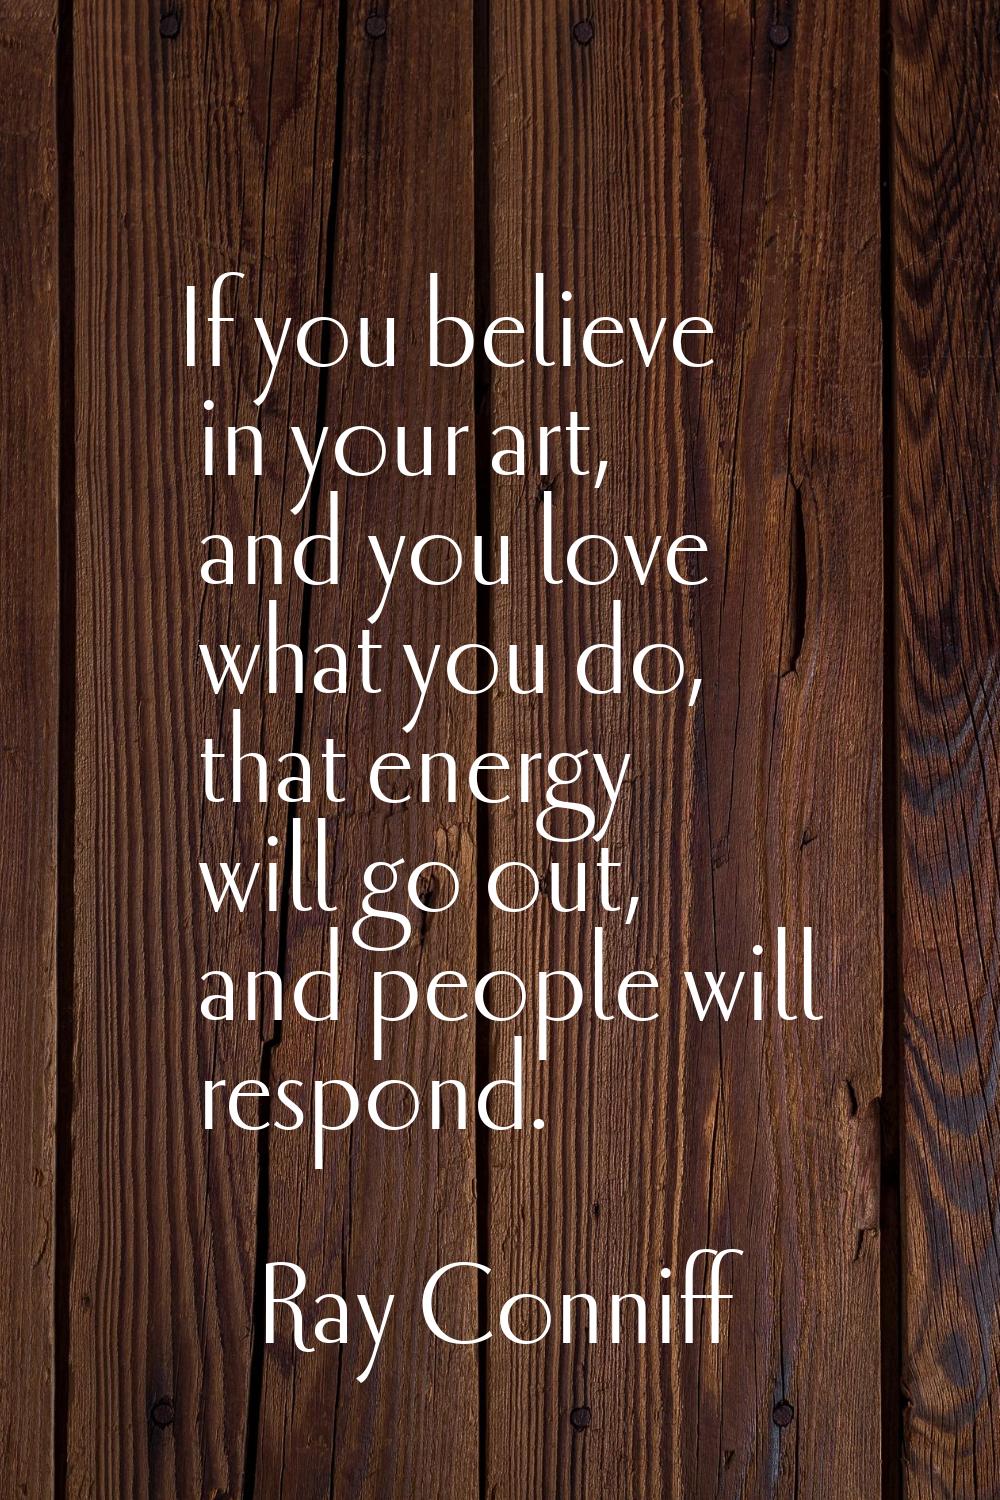 If you believe in your art, and you love what you do, that energy will go out, and people will resp